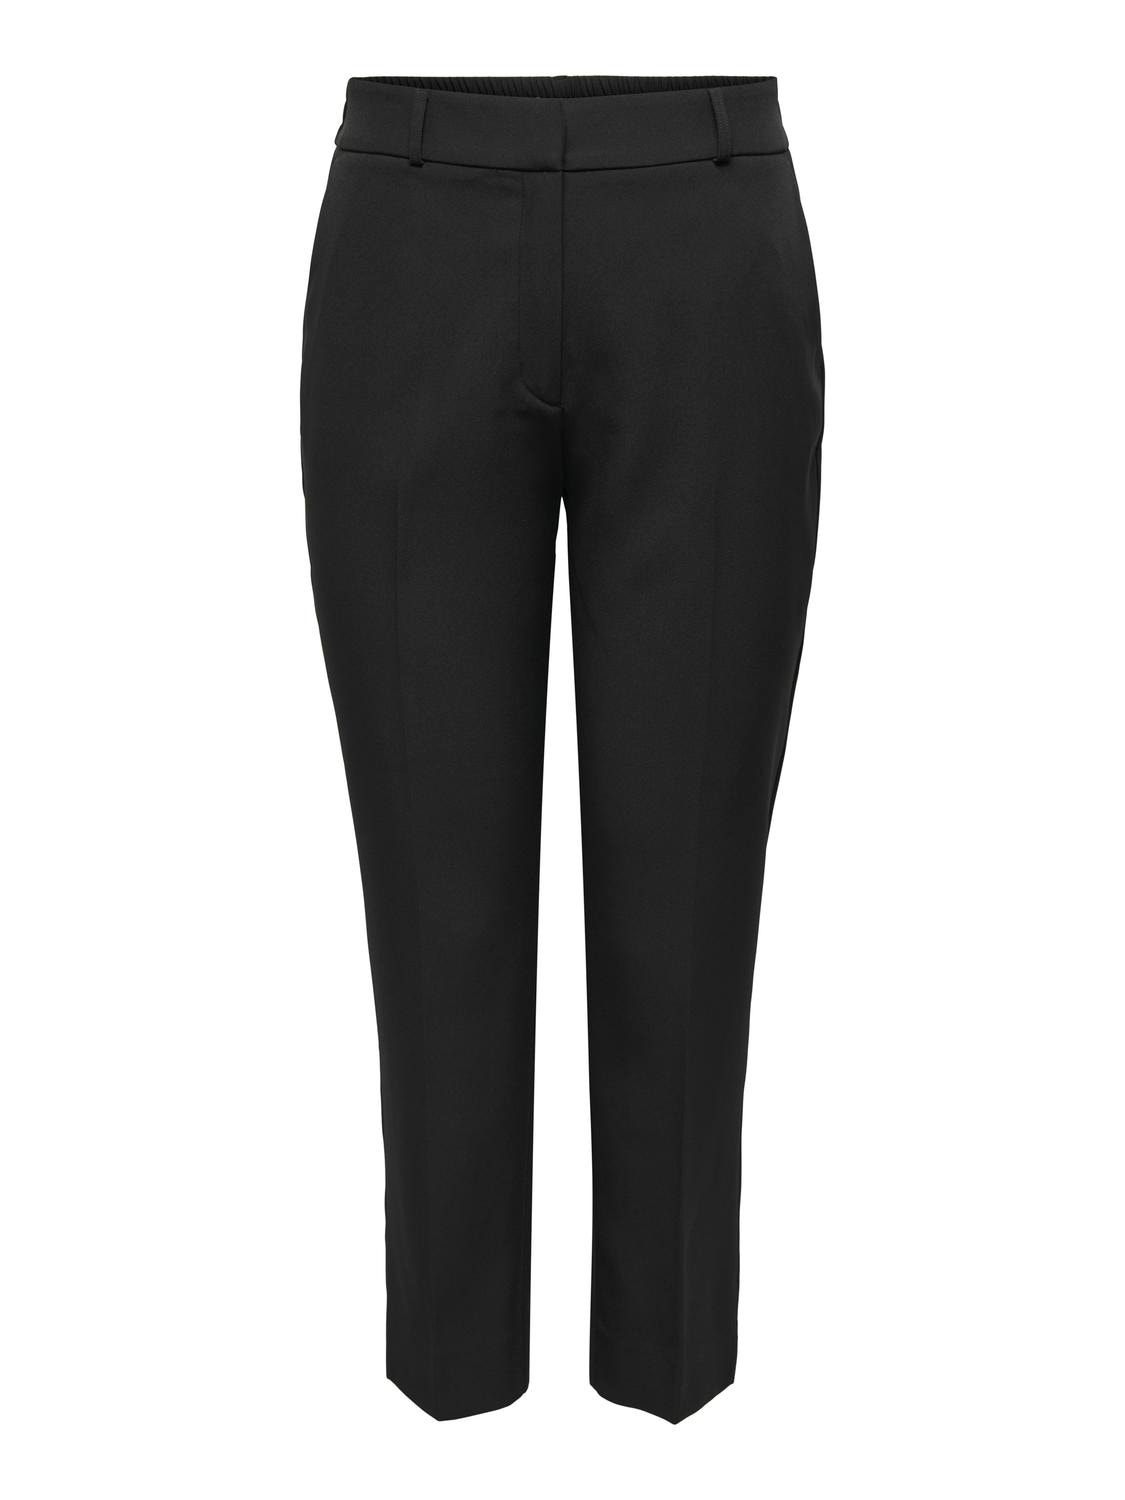 ONLY Slim Fit High waist Curve Trousers -Black - 15315675